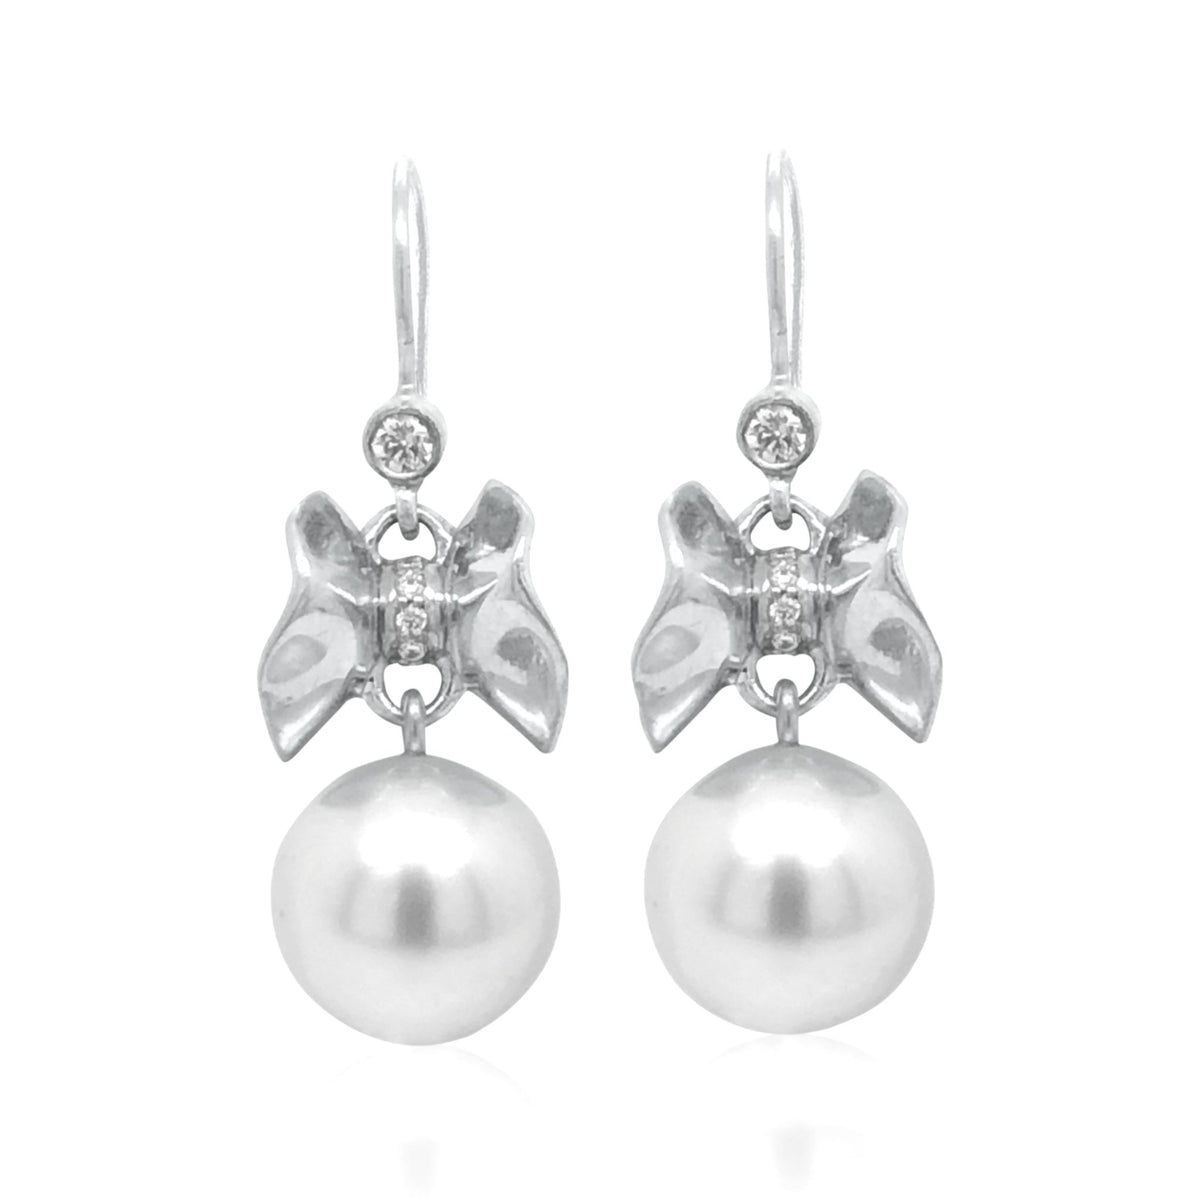 Upperline Wing Diamond Ruffle© and South Sea Pearl Earrings 18KW - Ashleigh Branstetter®